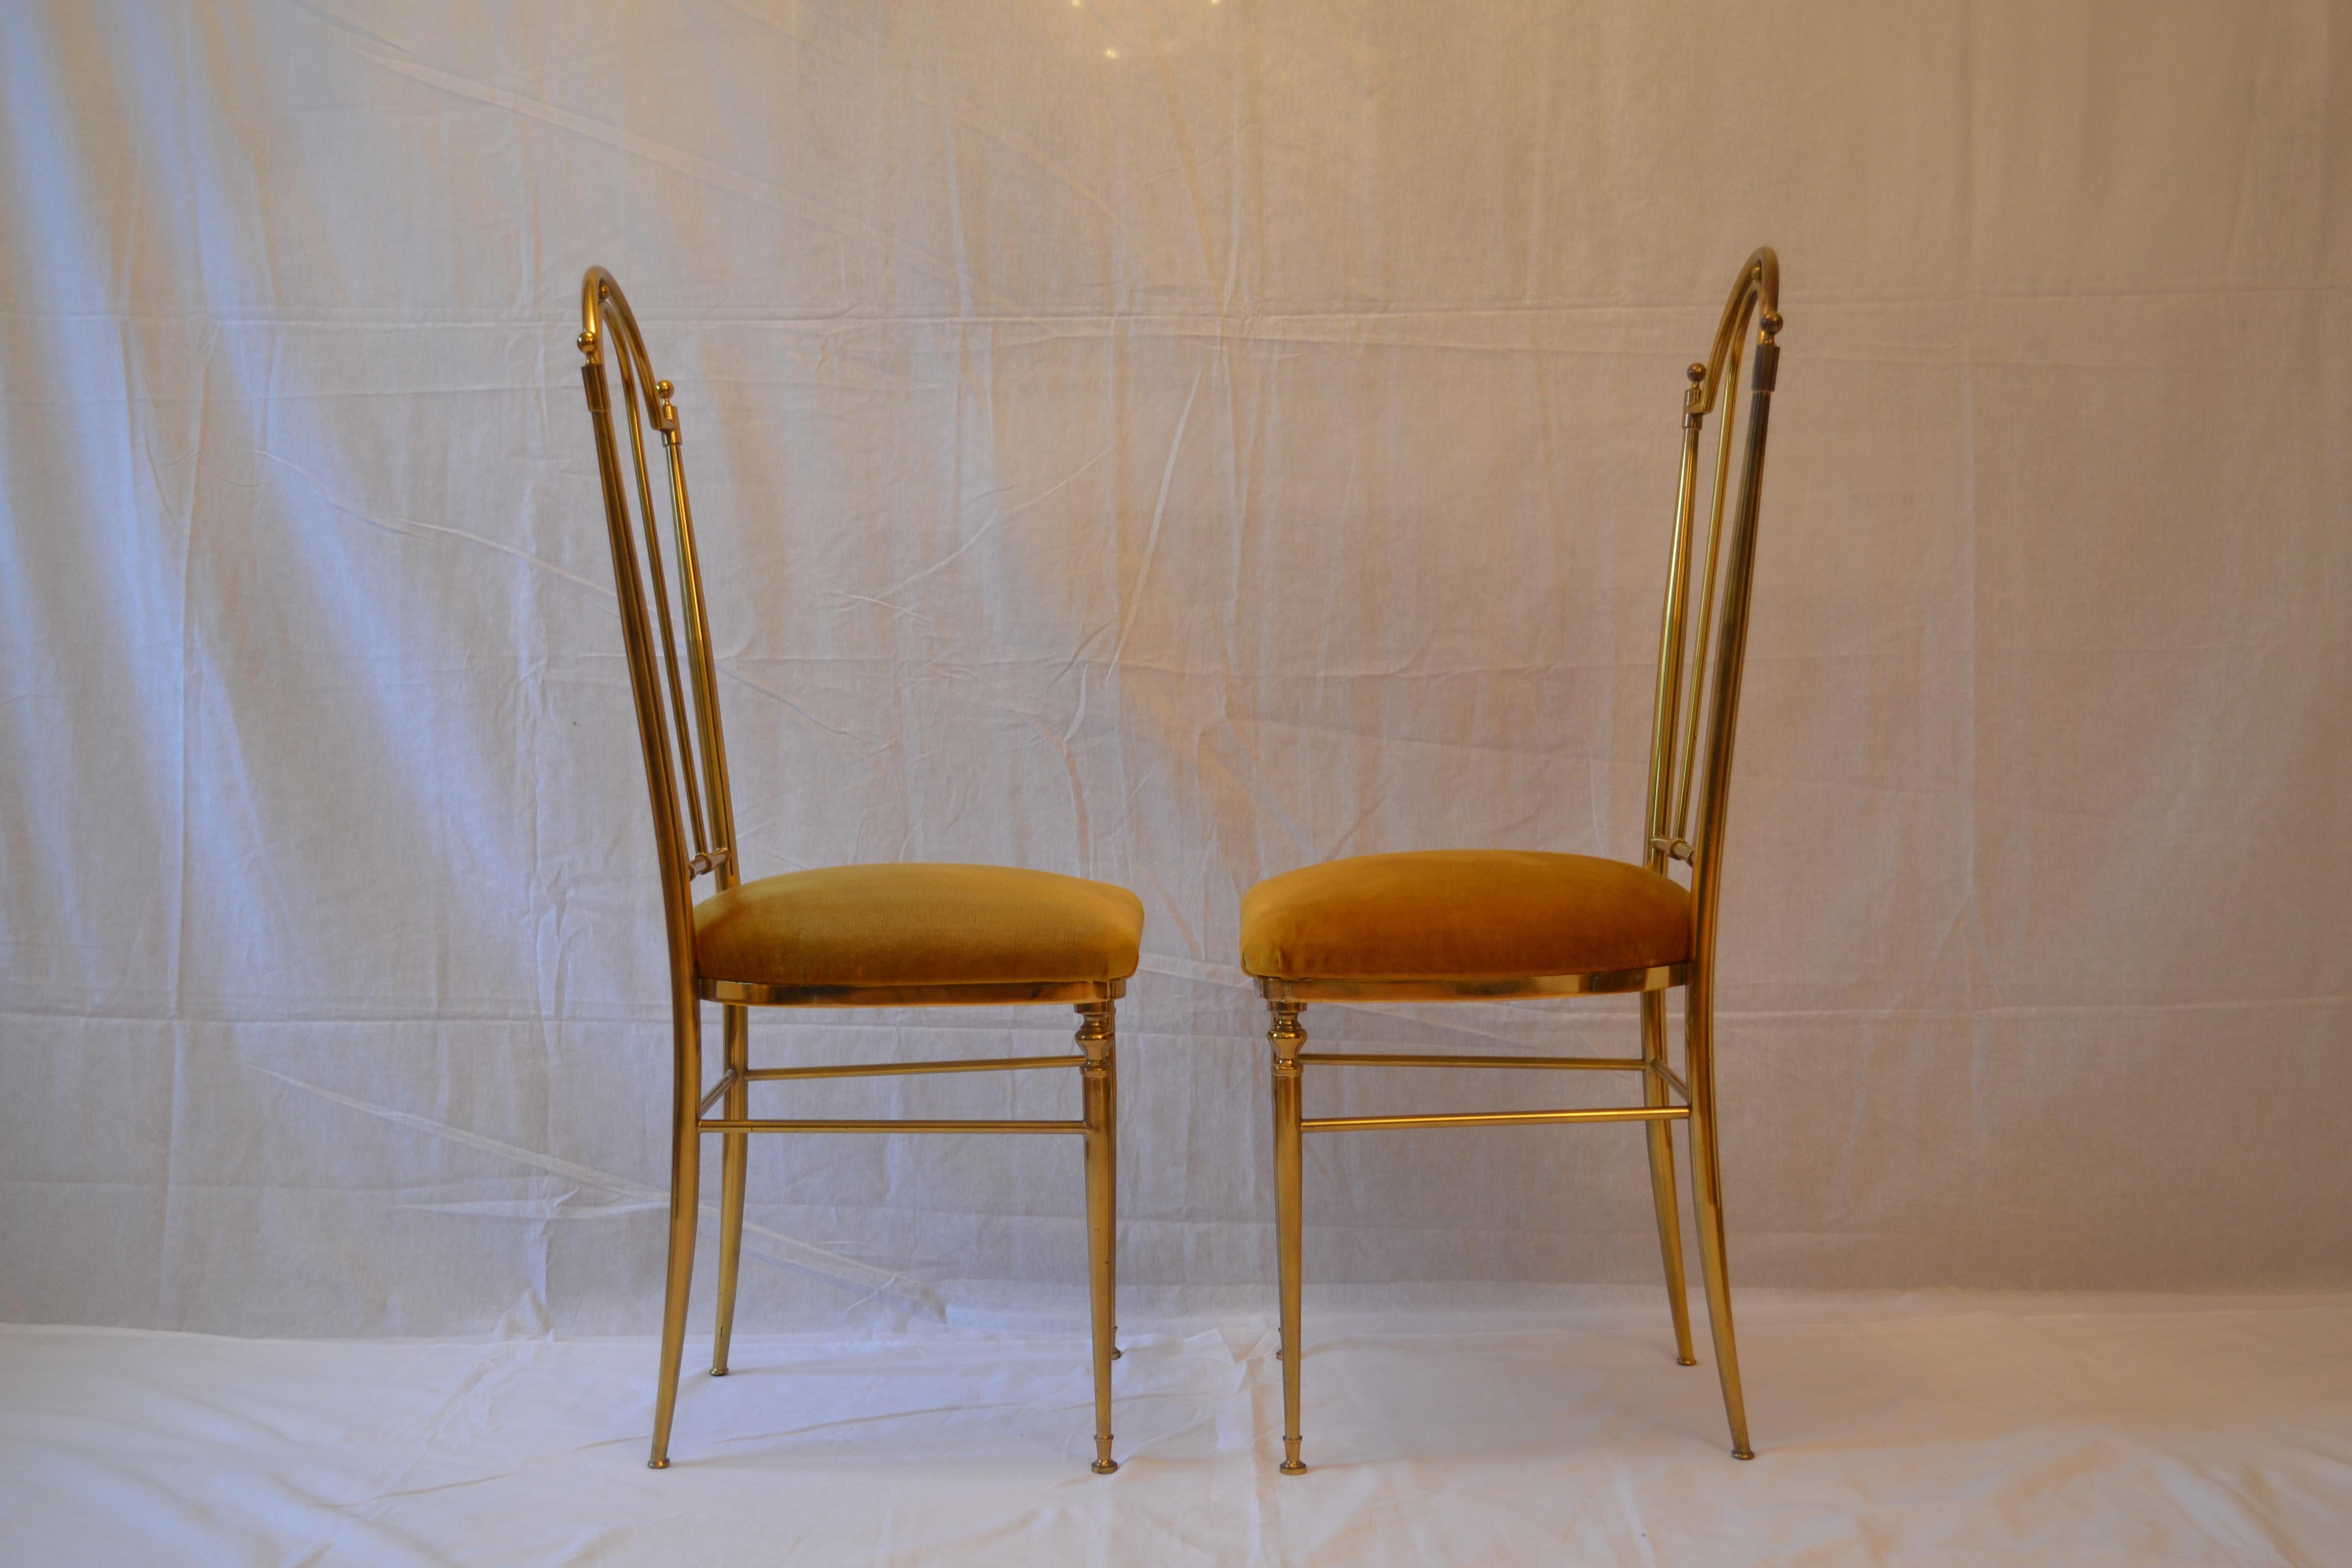 A pair of Chiavari brass chairs from the 1950s fully original. An attractive, timeless form. Perfect performance and very good condition.